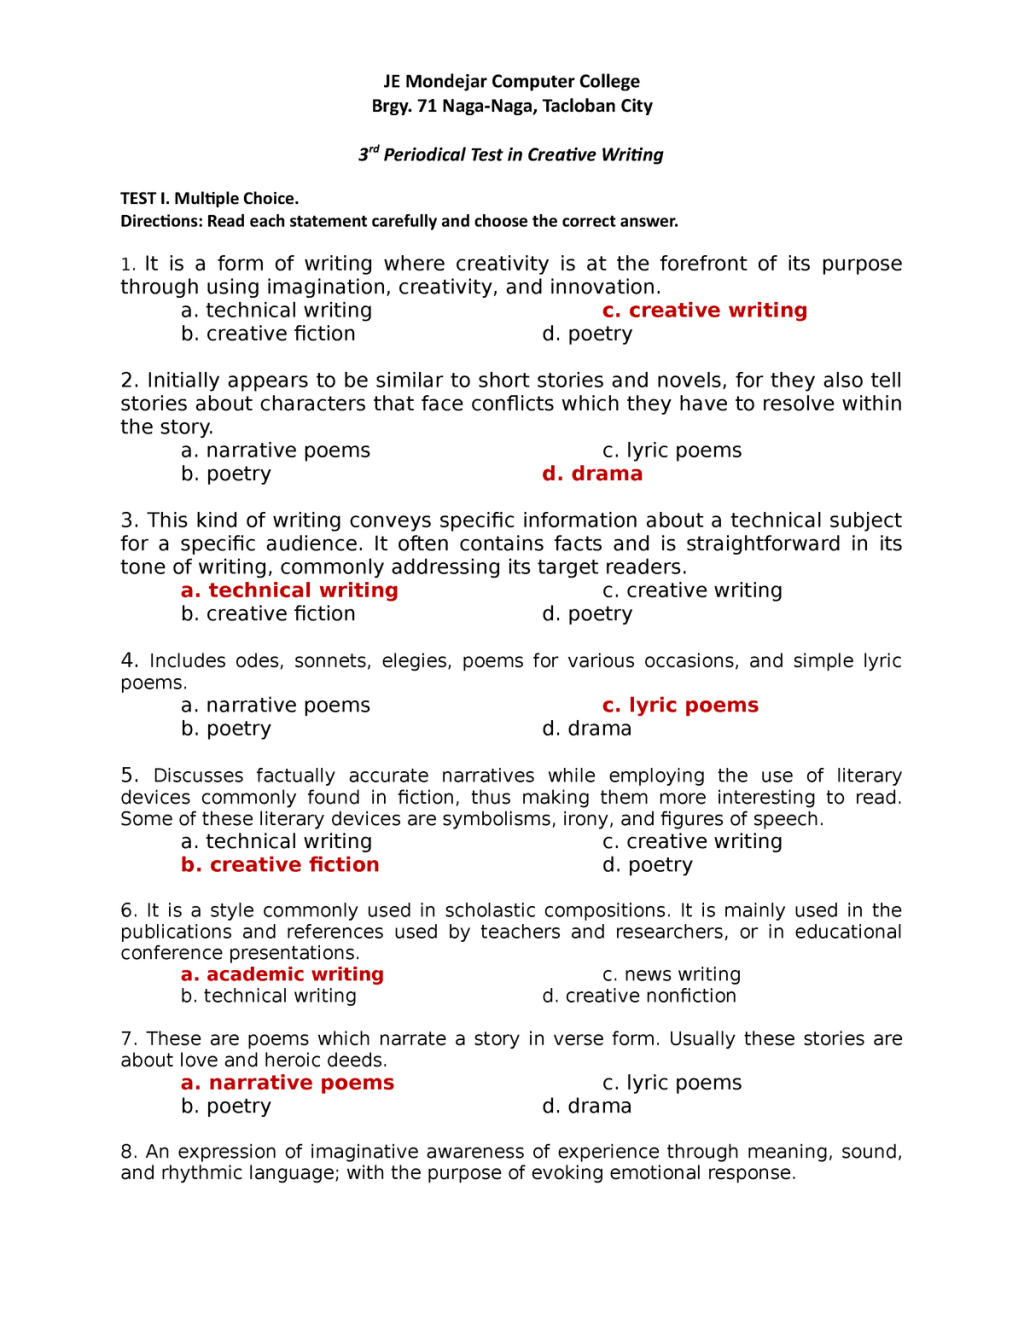 Picture of: rd Periodical Test in Creative Writing – JE Mondejar Computer